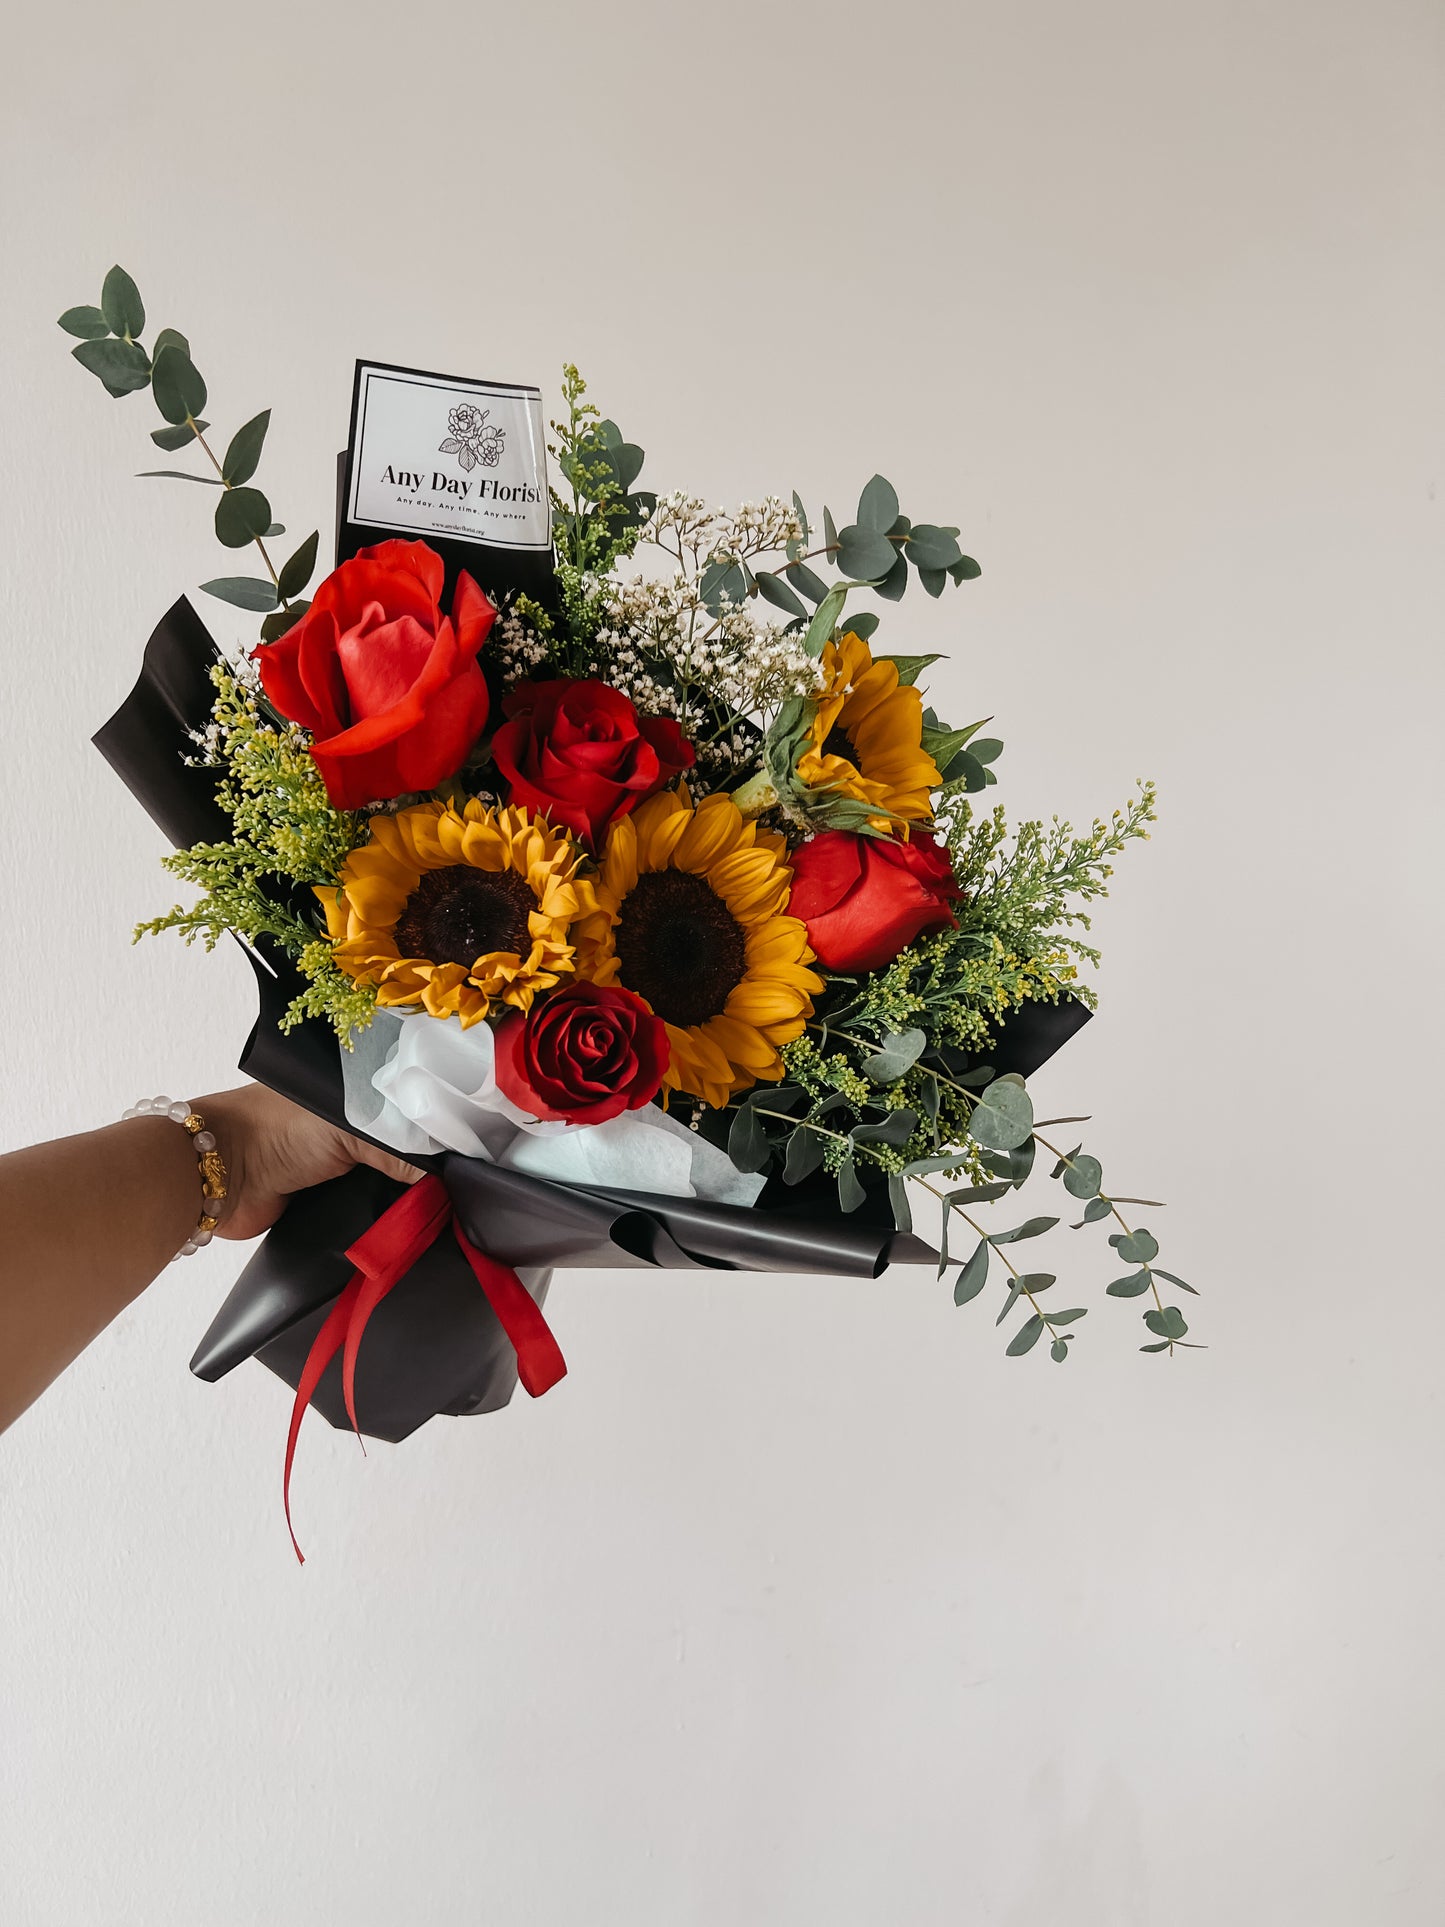 Any Day Florist
The best way to find out if a rose is real is to cut it  Rosie loves the sun and flowers, so she put them together in this beautiful Sunflower Rose Bouquet. She hanSunflower Rosie | Sunflower Roses Bouquet